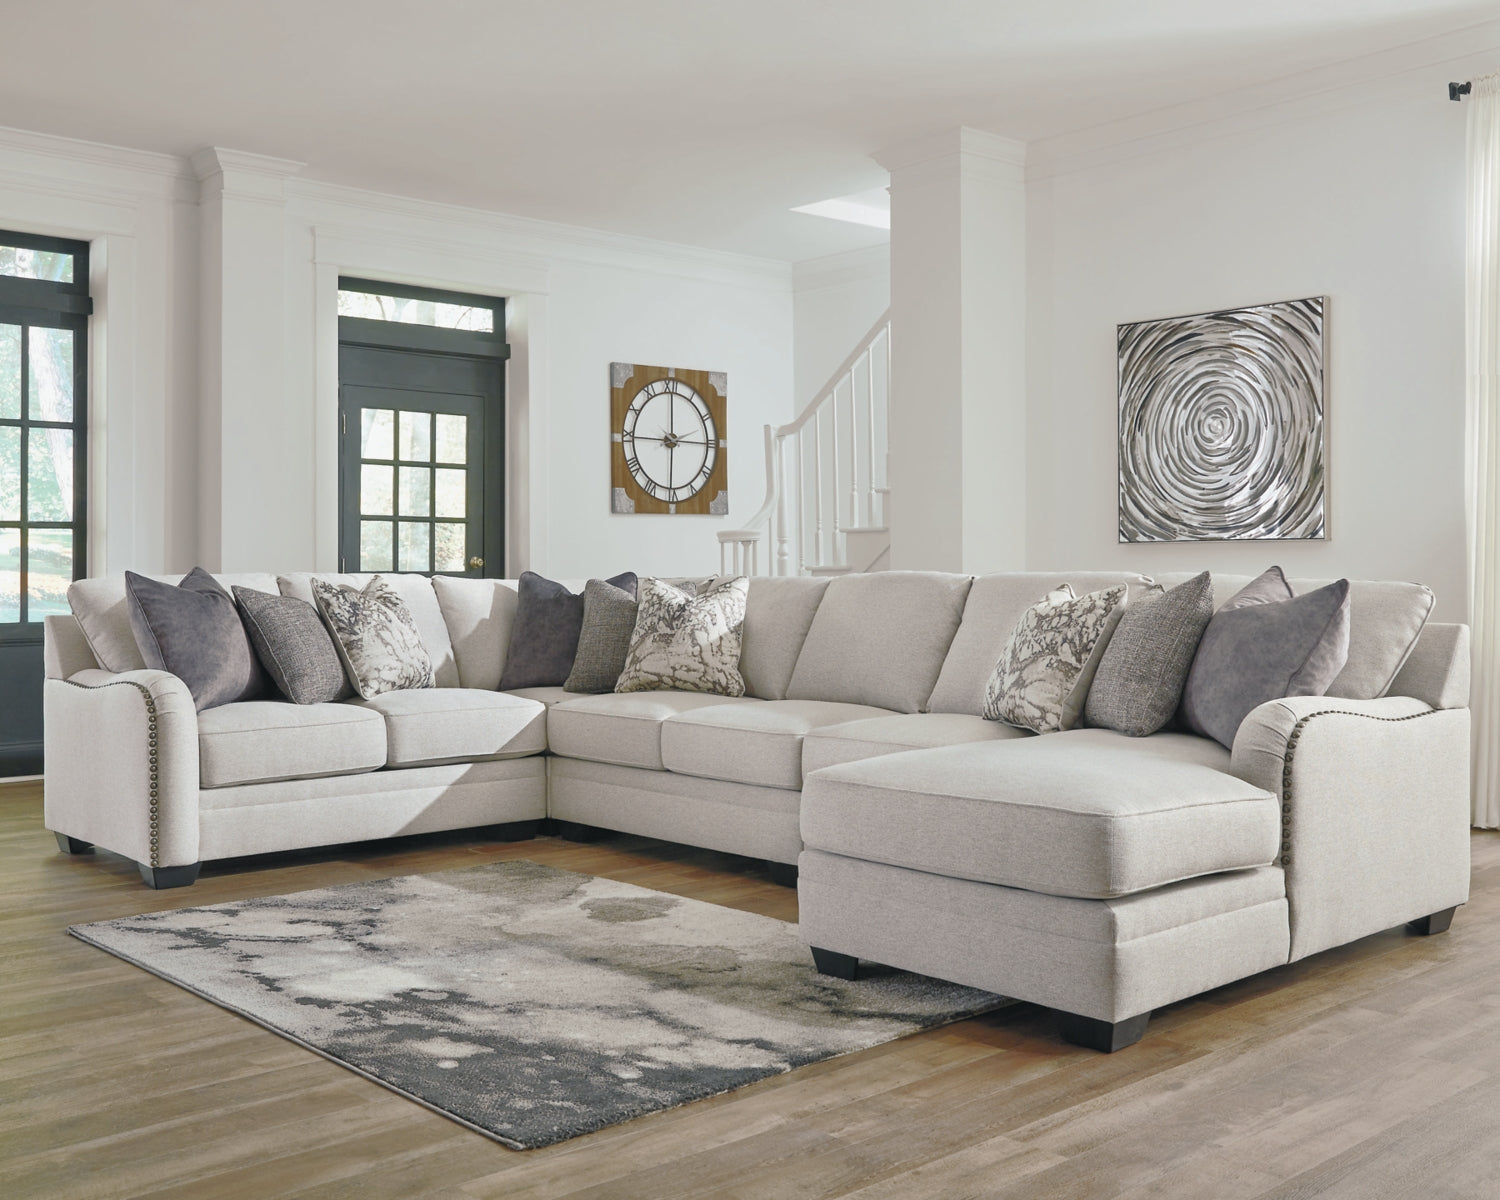 Dellara 5-Piece Sectional with Ottoman